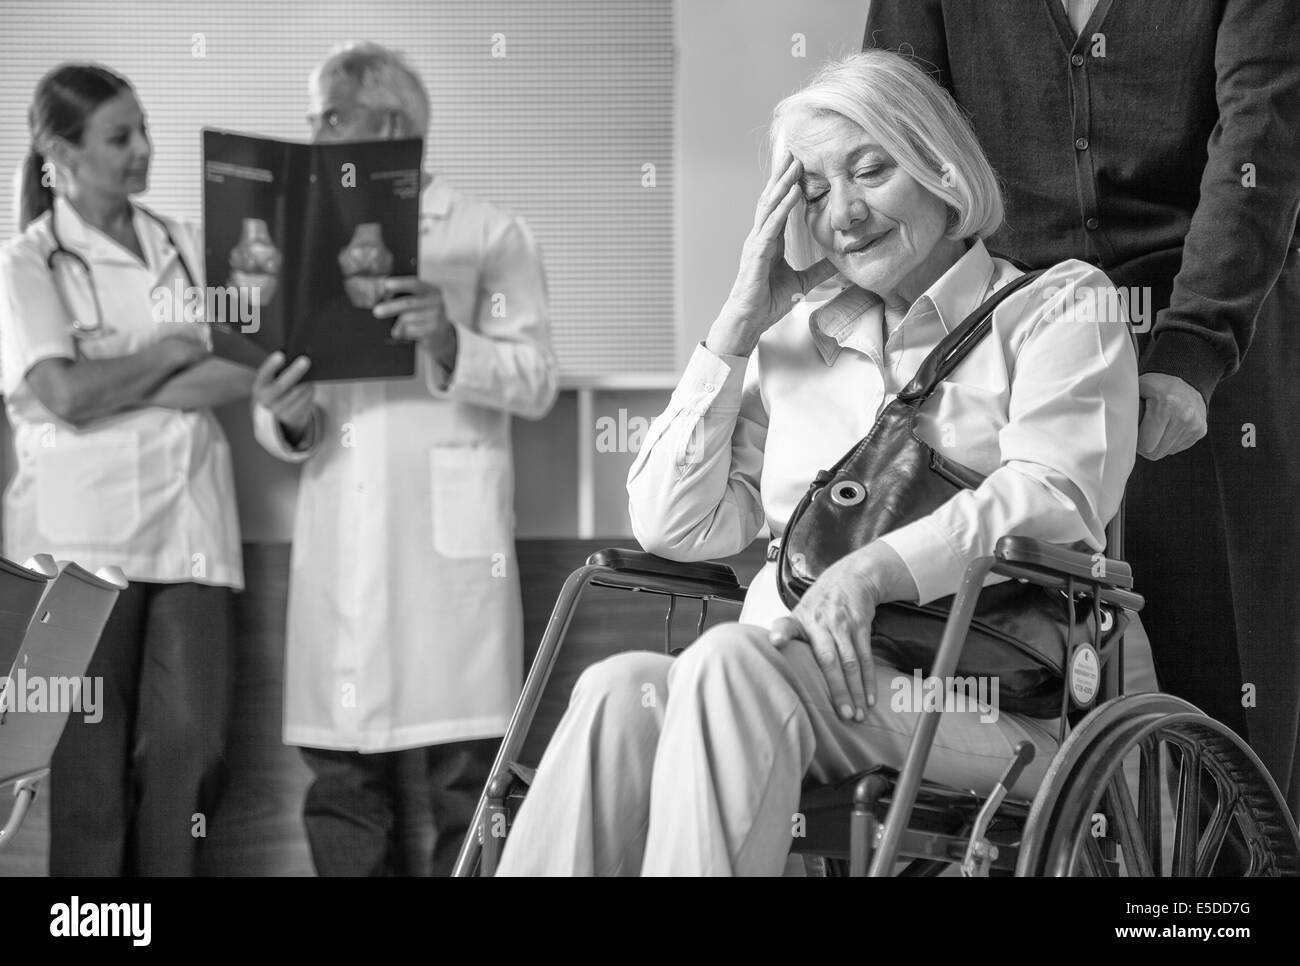 Mature woman on the wheelchair in hospital worried with her husband. Doctors analyzing scan in background. Stock Photo